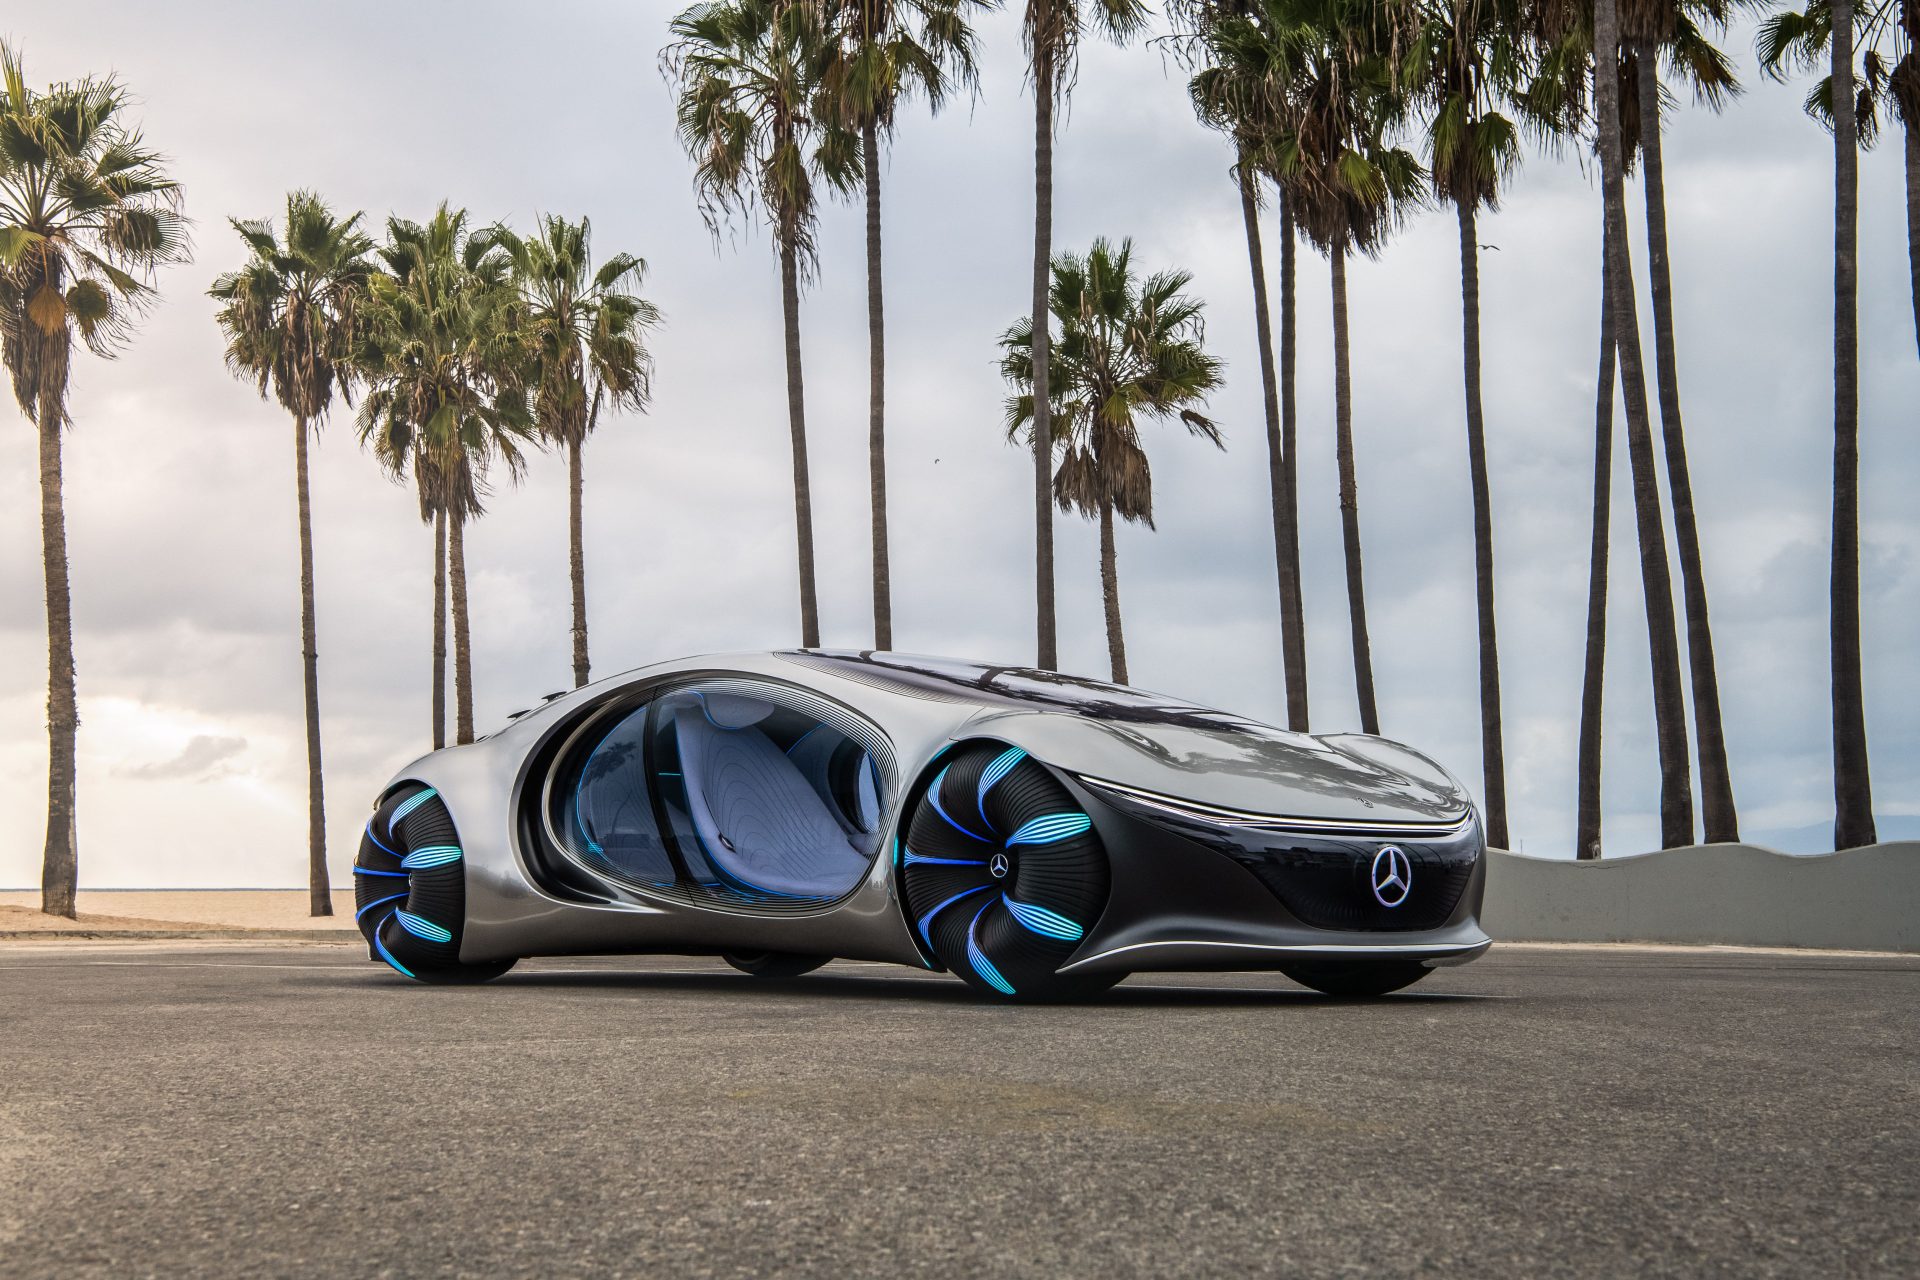 We Drive The Mercedes-Benz Vision AVTR – The Futuristic Car Coming Out Of Avatar